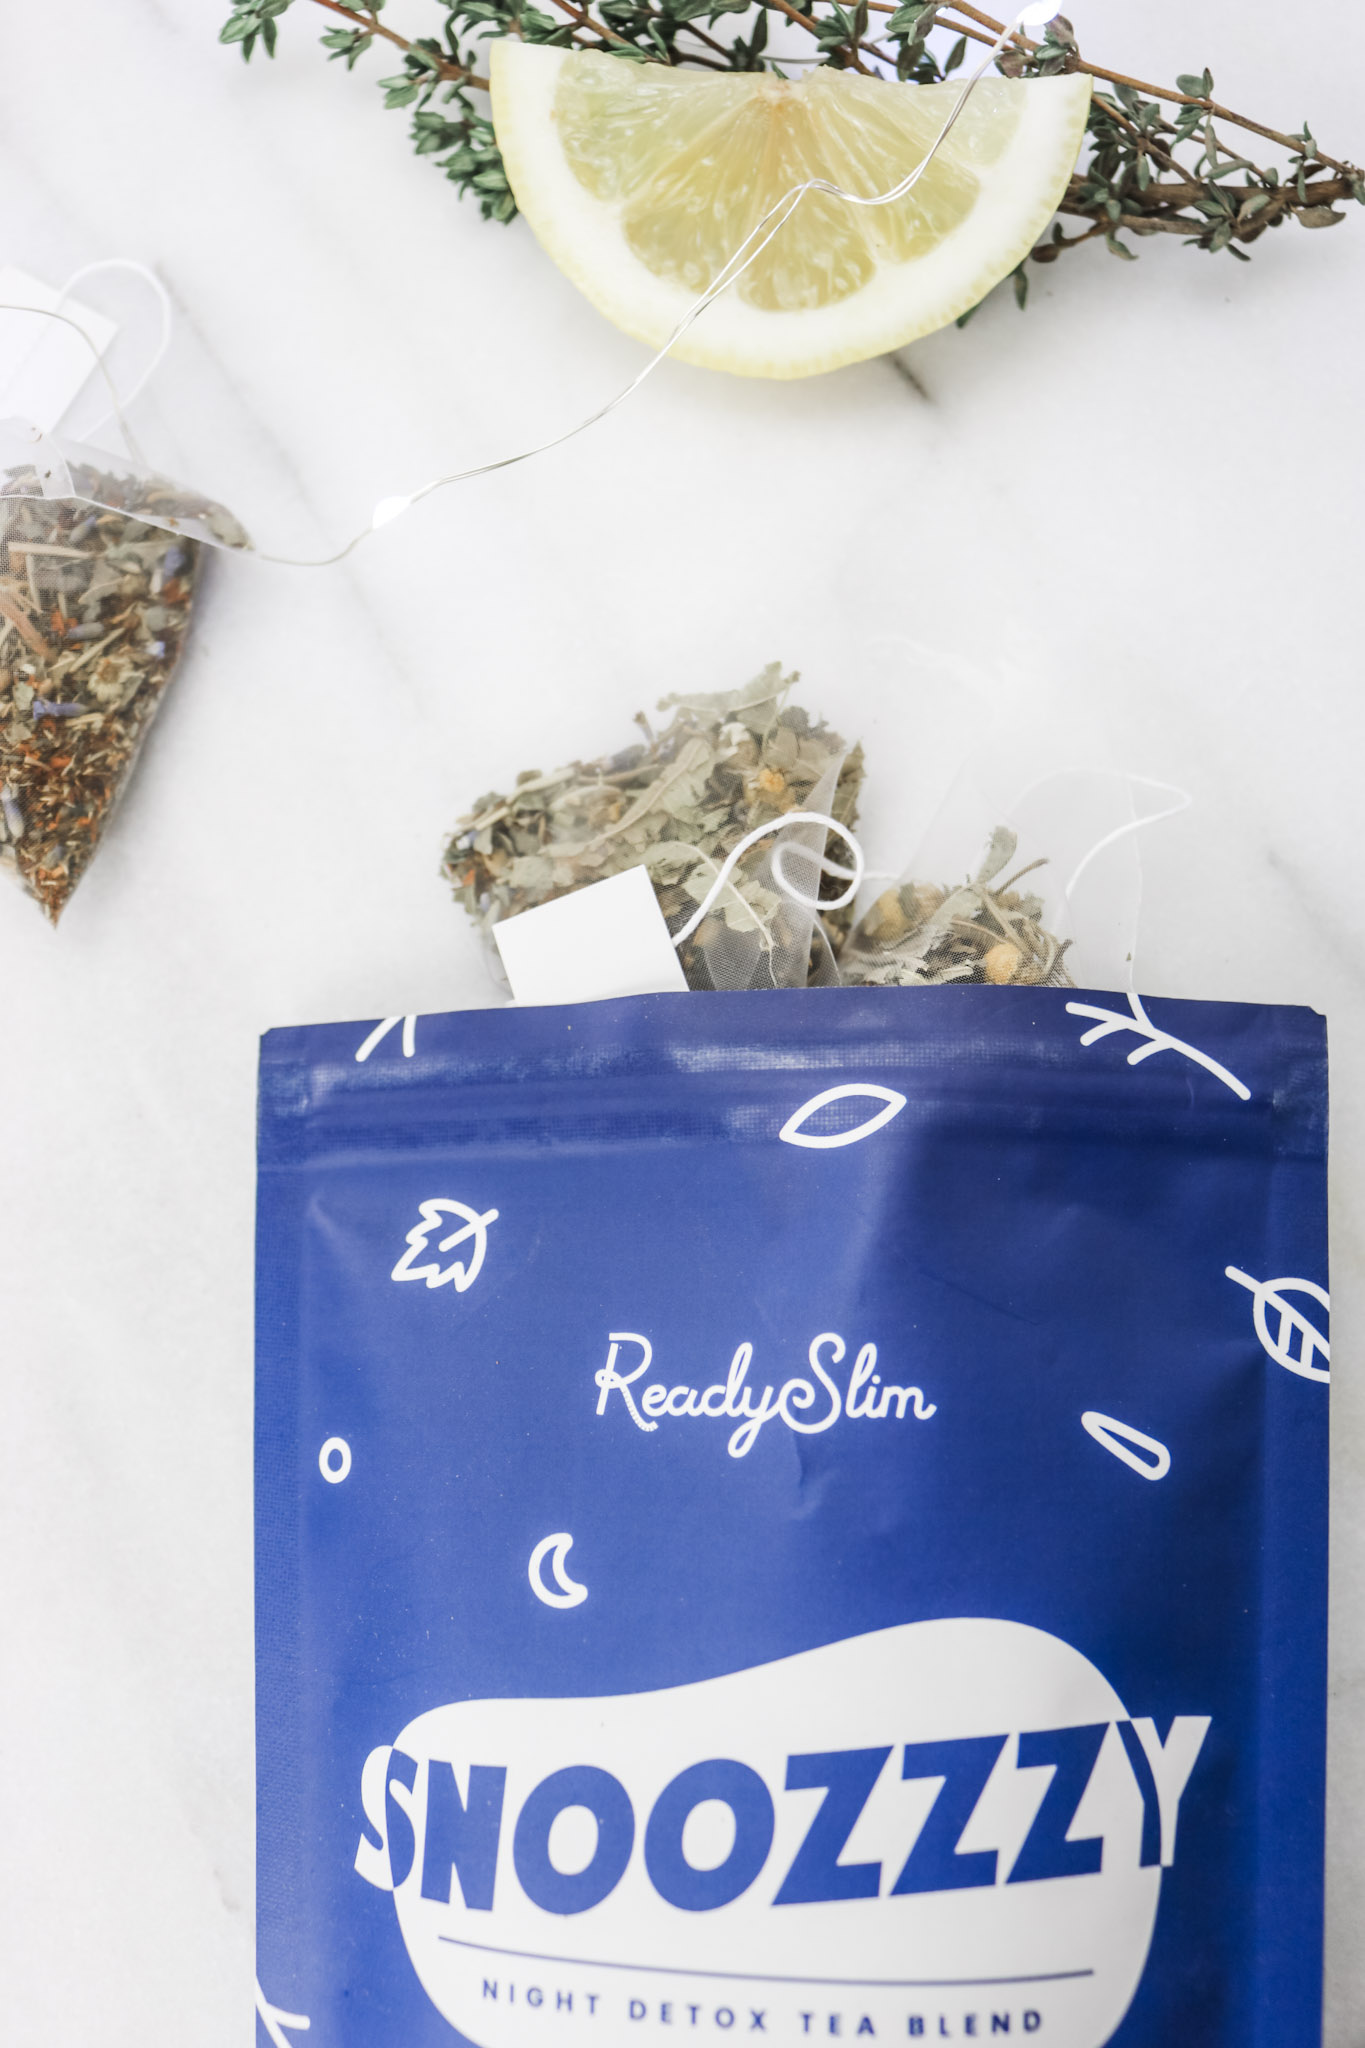 A ReadySlim bag is open with tea bags falling out. There is a slice of lemon and thyme and fairy lights surrounding it.